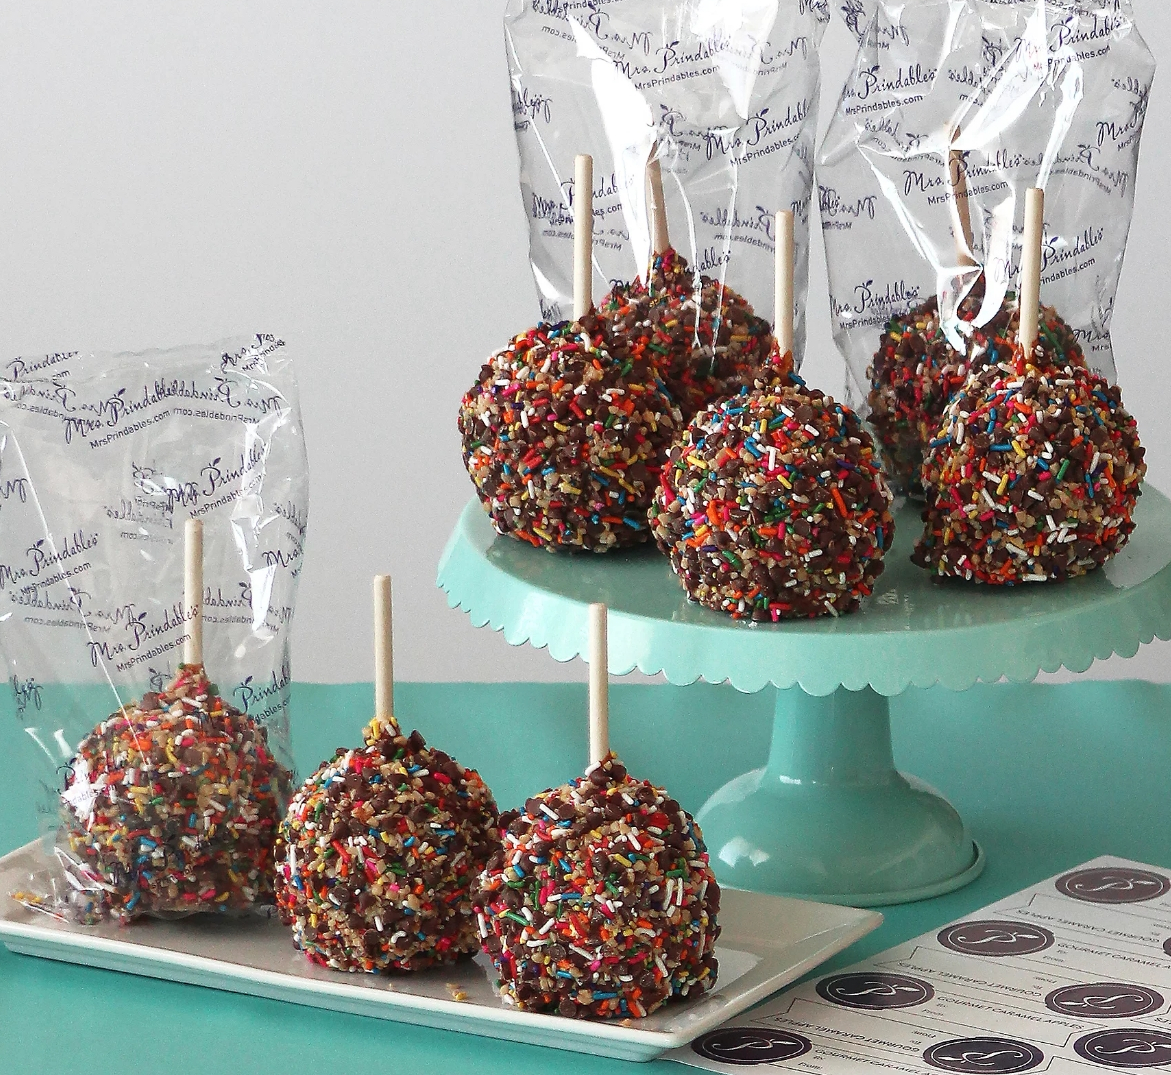 Caramel apples with sprinkles on them on a tray and on a cake stand